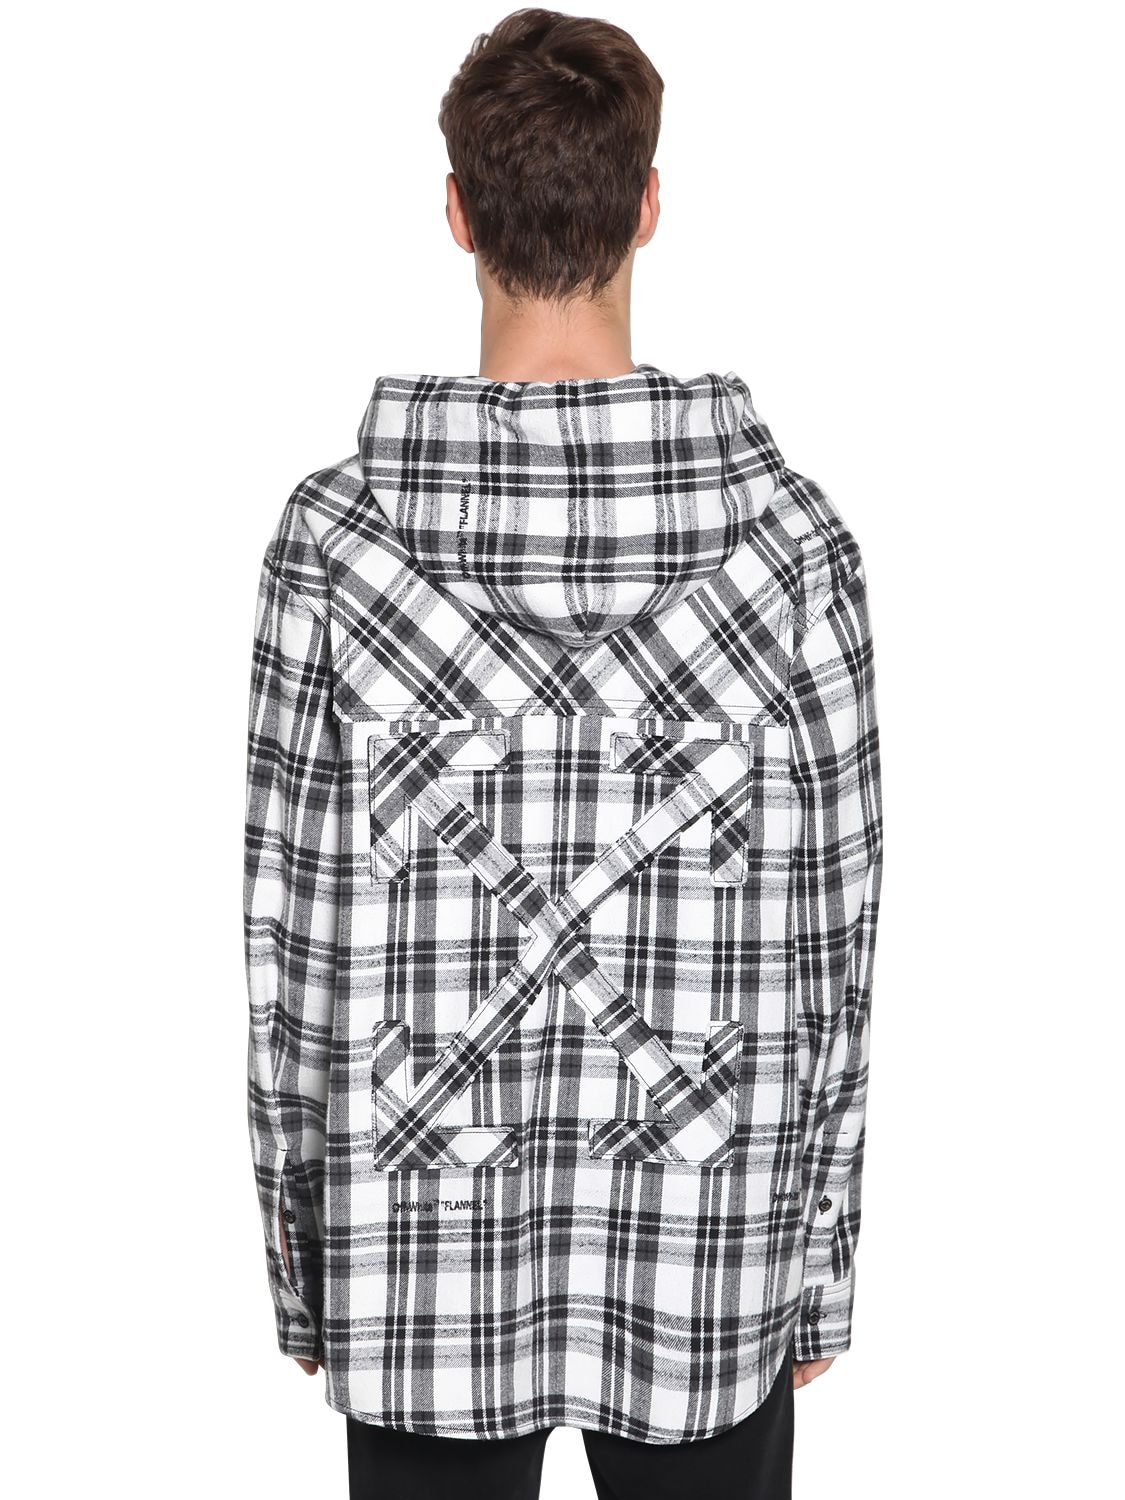 OFF-WHITE OVER HOODED CHECK COTTON BLEND SHIRT,71ILFA037-MDEWMA2